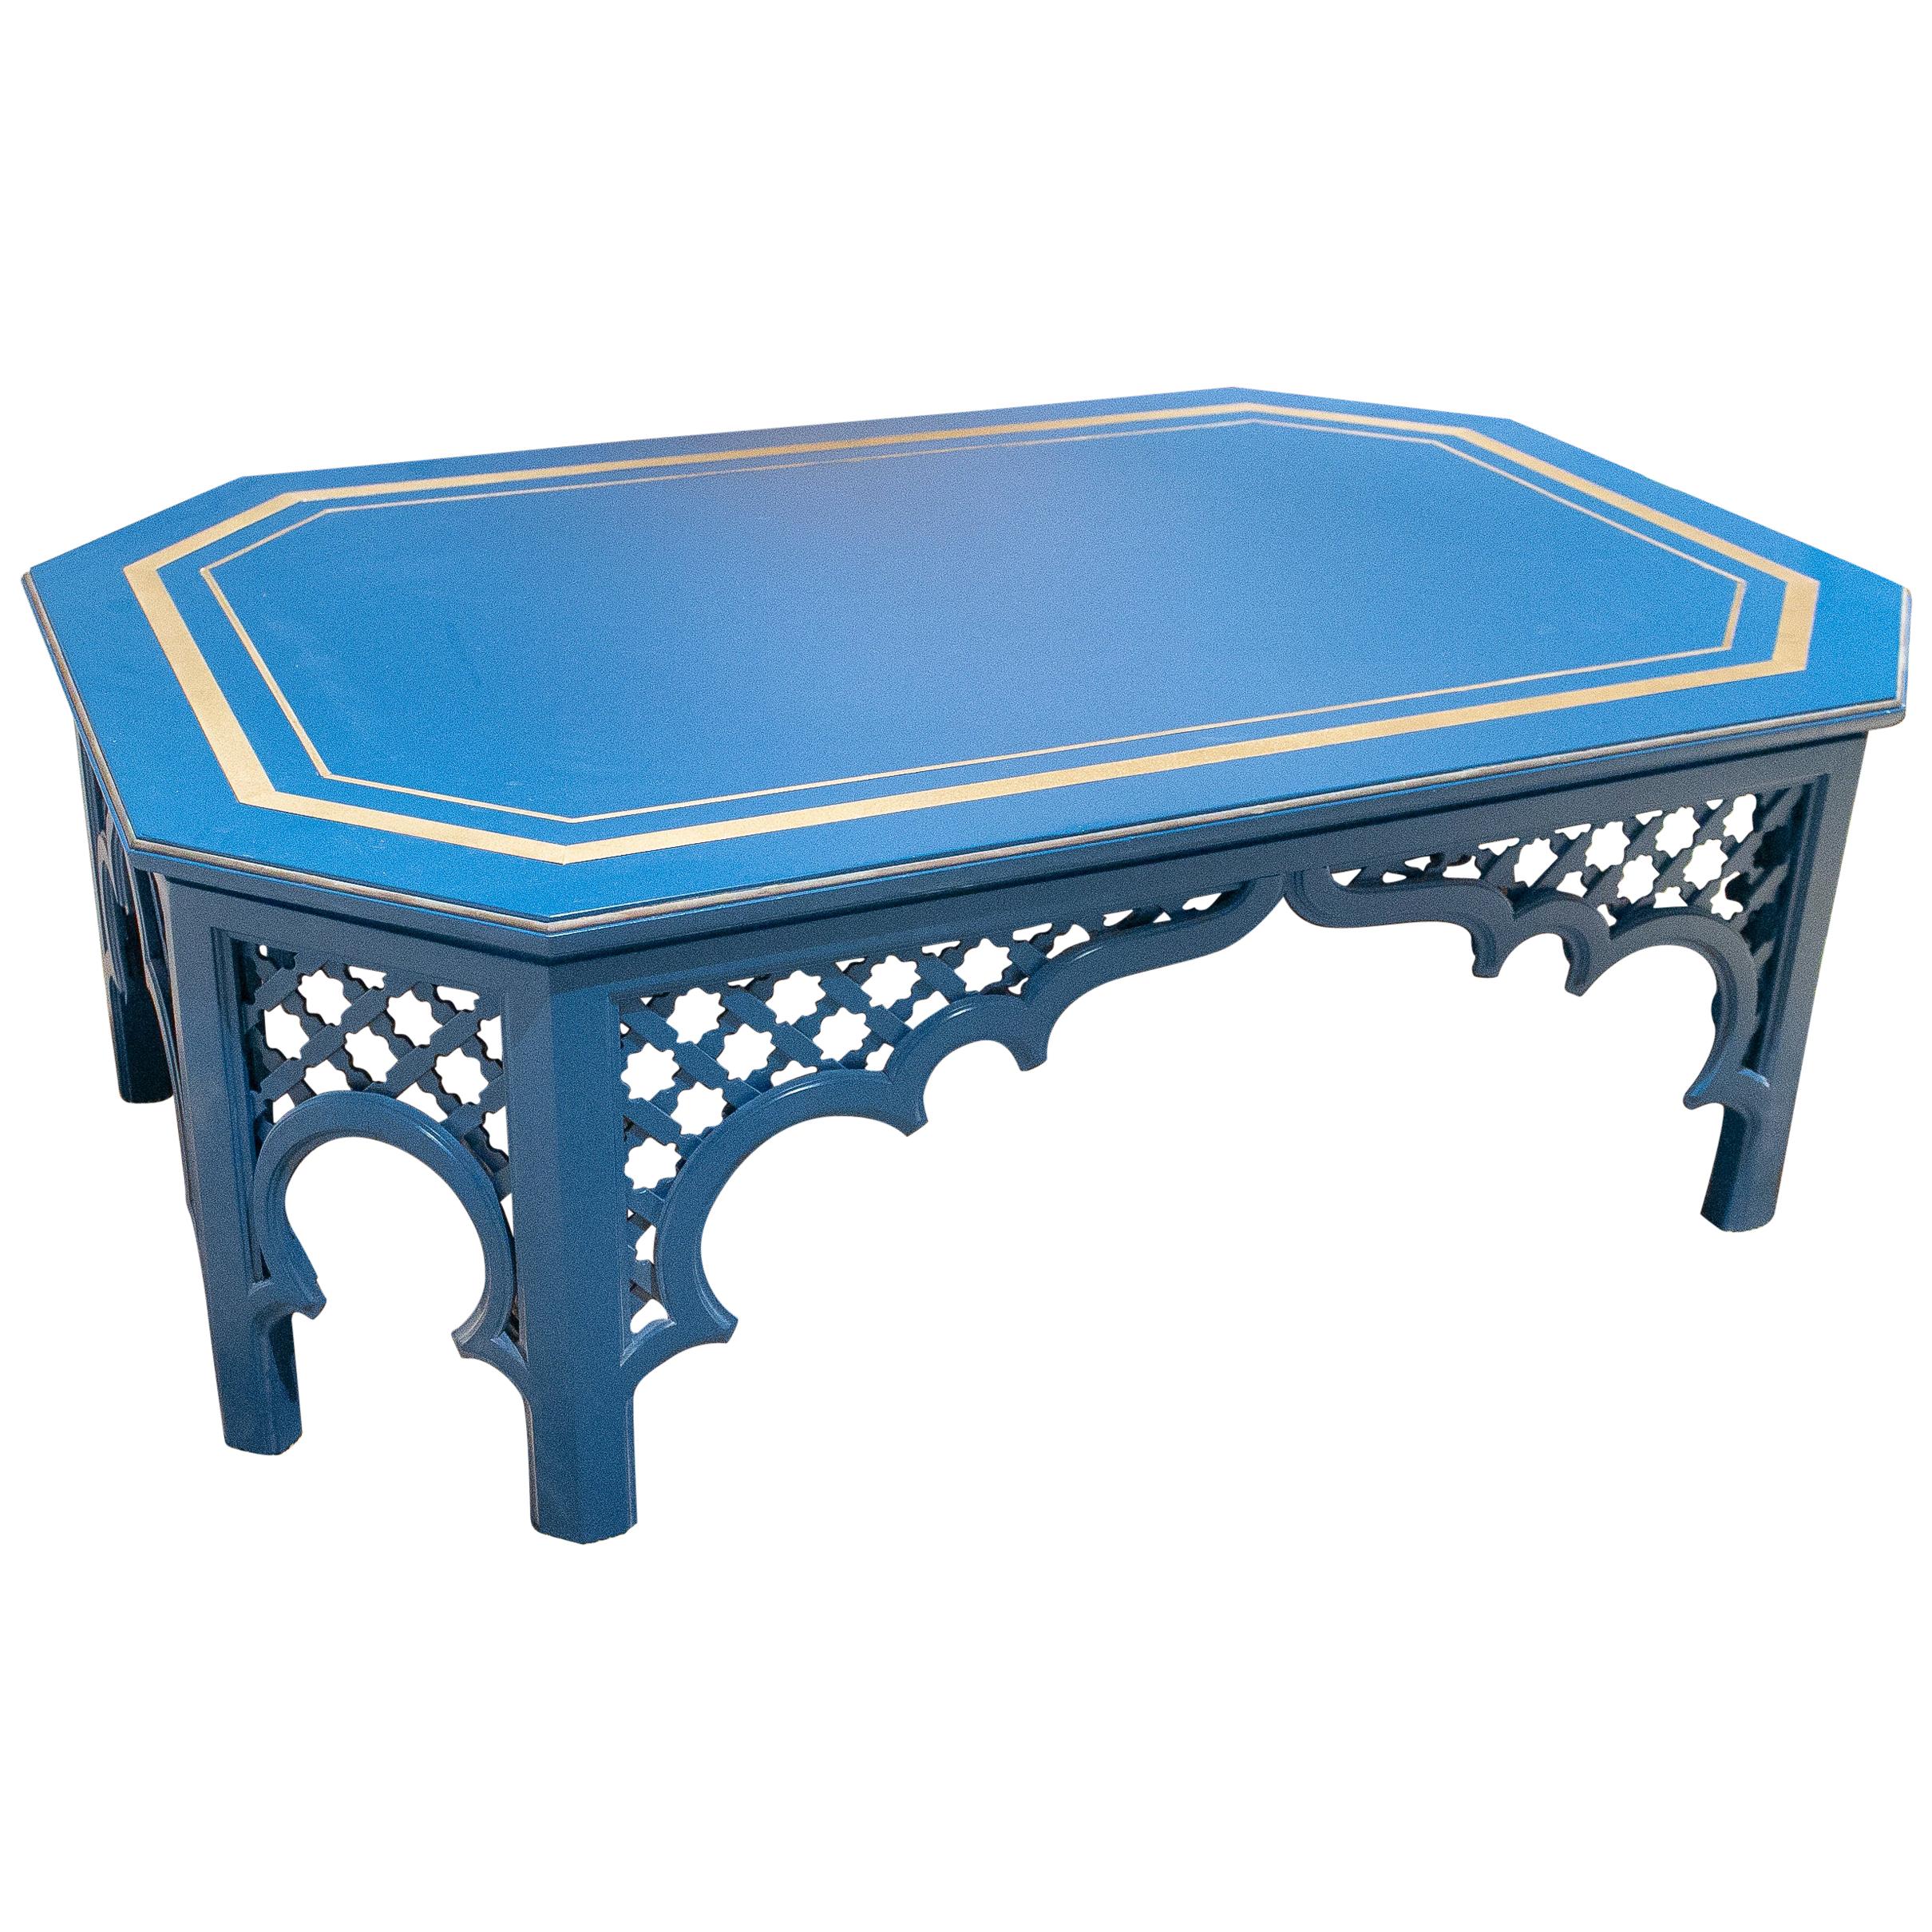 1970s Spanish Al-Andalus Inspired Wood and Brass Blue Coffee Table For Sale